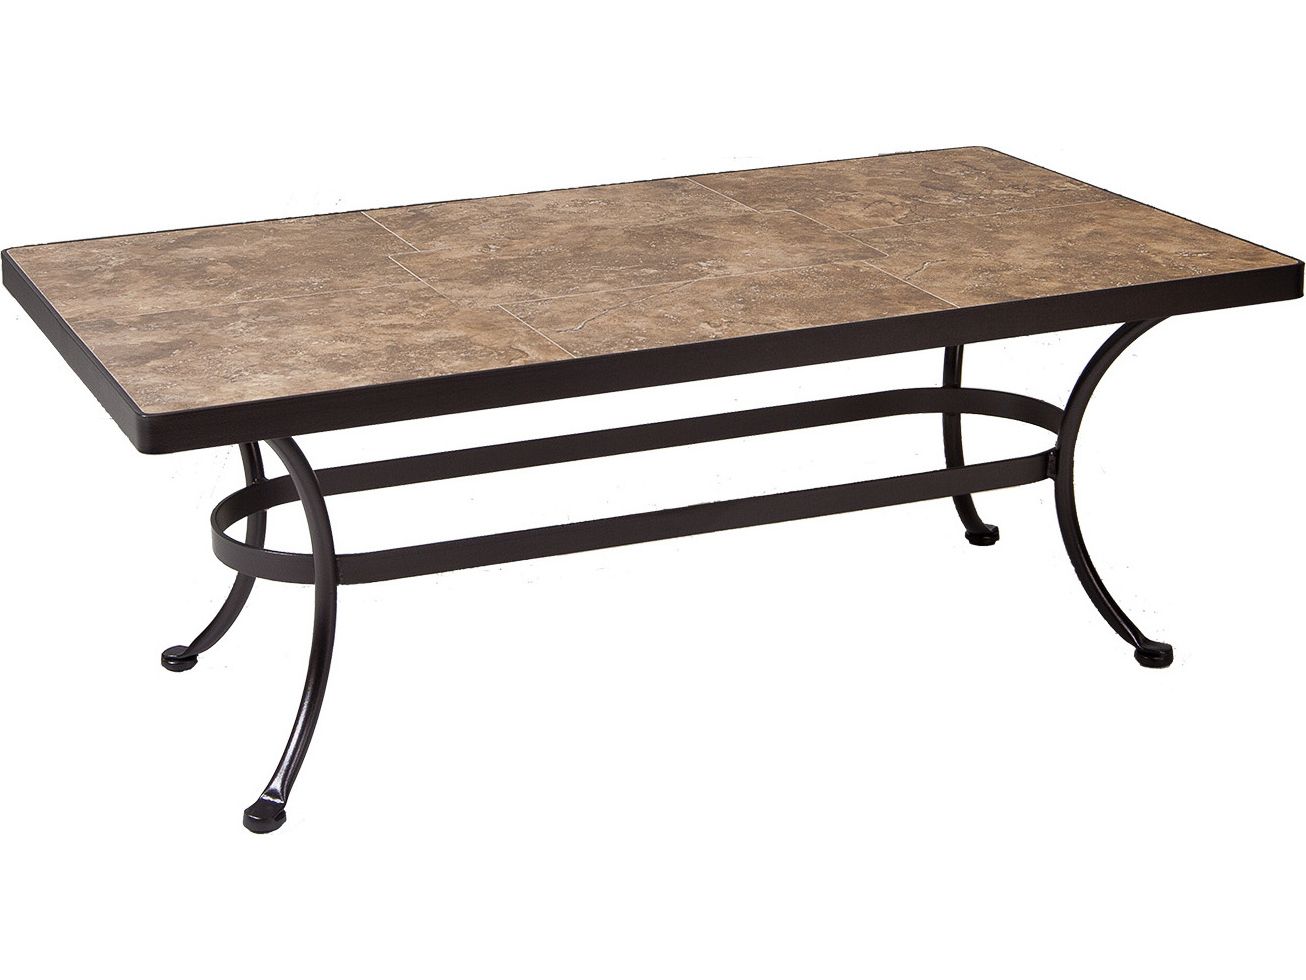 Ow Lee Wrought Iron Rectangular Coffee Table Base 43w X 20''d X  (View 8 of 20)